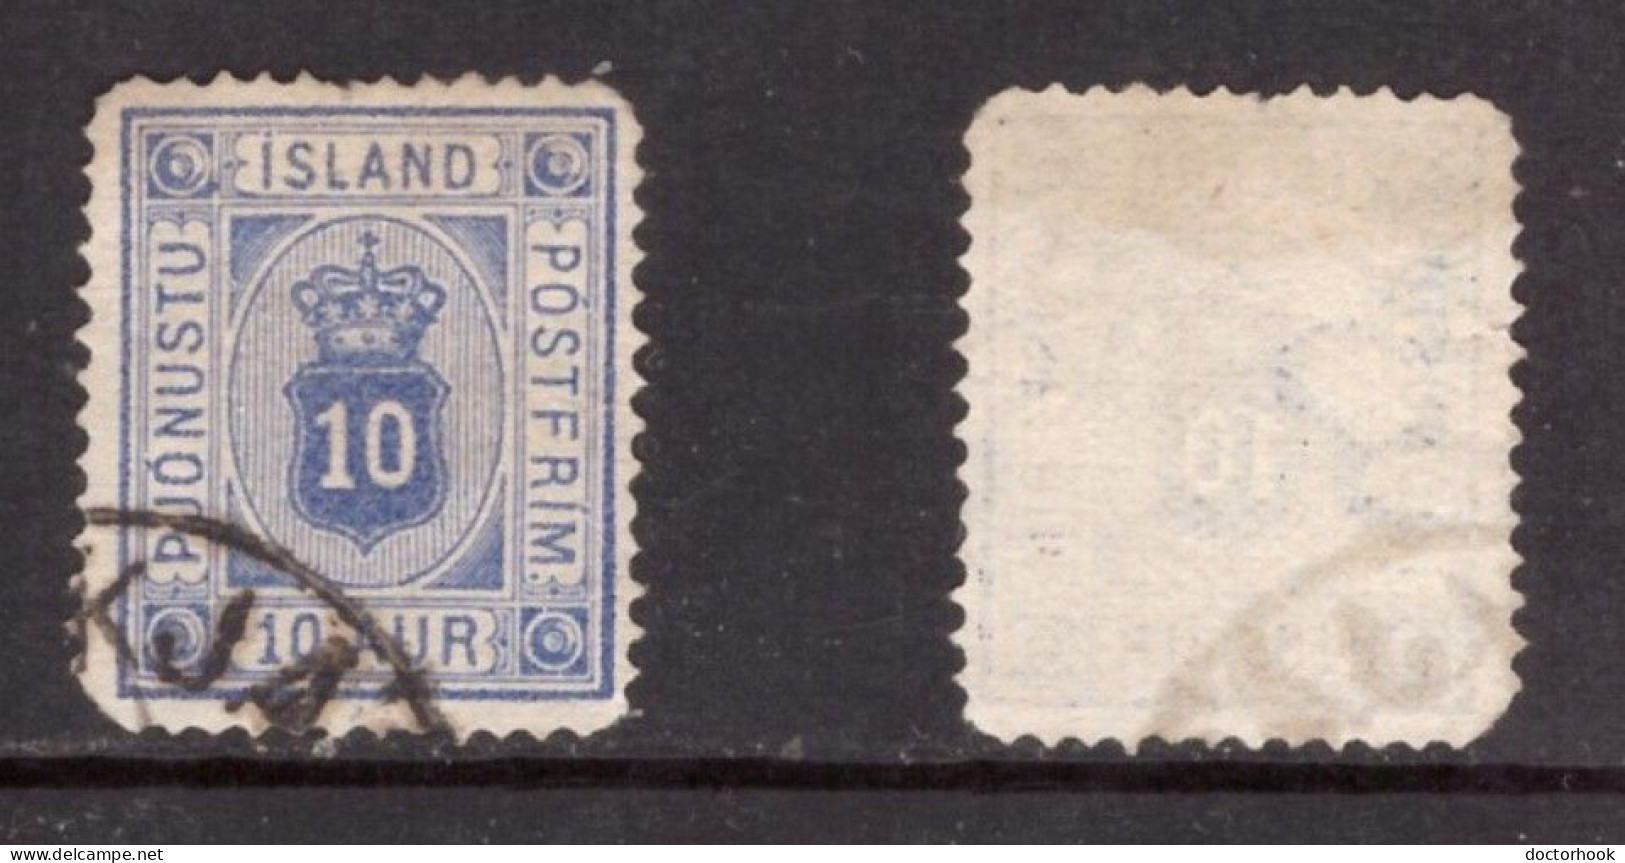 ICELAND   Scott # O 6 USED FAULTS (CONDITION AS PER SCAN) (Stamp Scan # 957-19) - Servizio